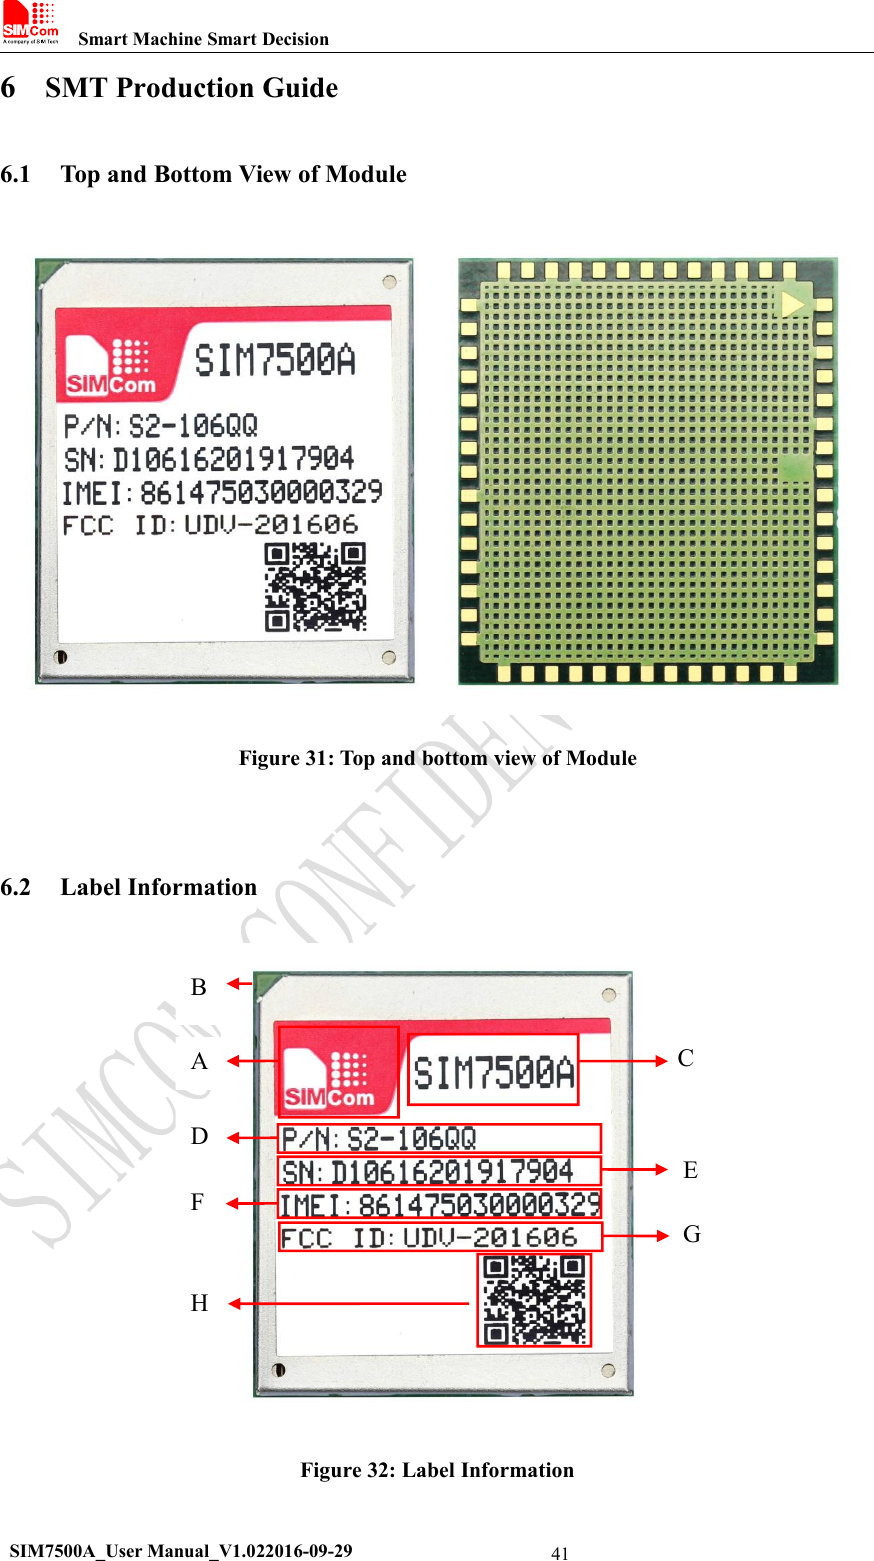 Smart Machine Smart DecisionSIM7500A_User Manual_V1.022016-09-29416SMT Production Guide6.1 Top and Bottom View of ModuleFigure 31: Top and bottom view of Module6.2 Label InformationFigure 32: Label InformationADFHBGCE